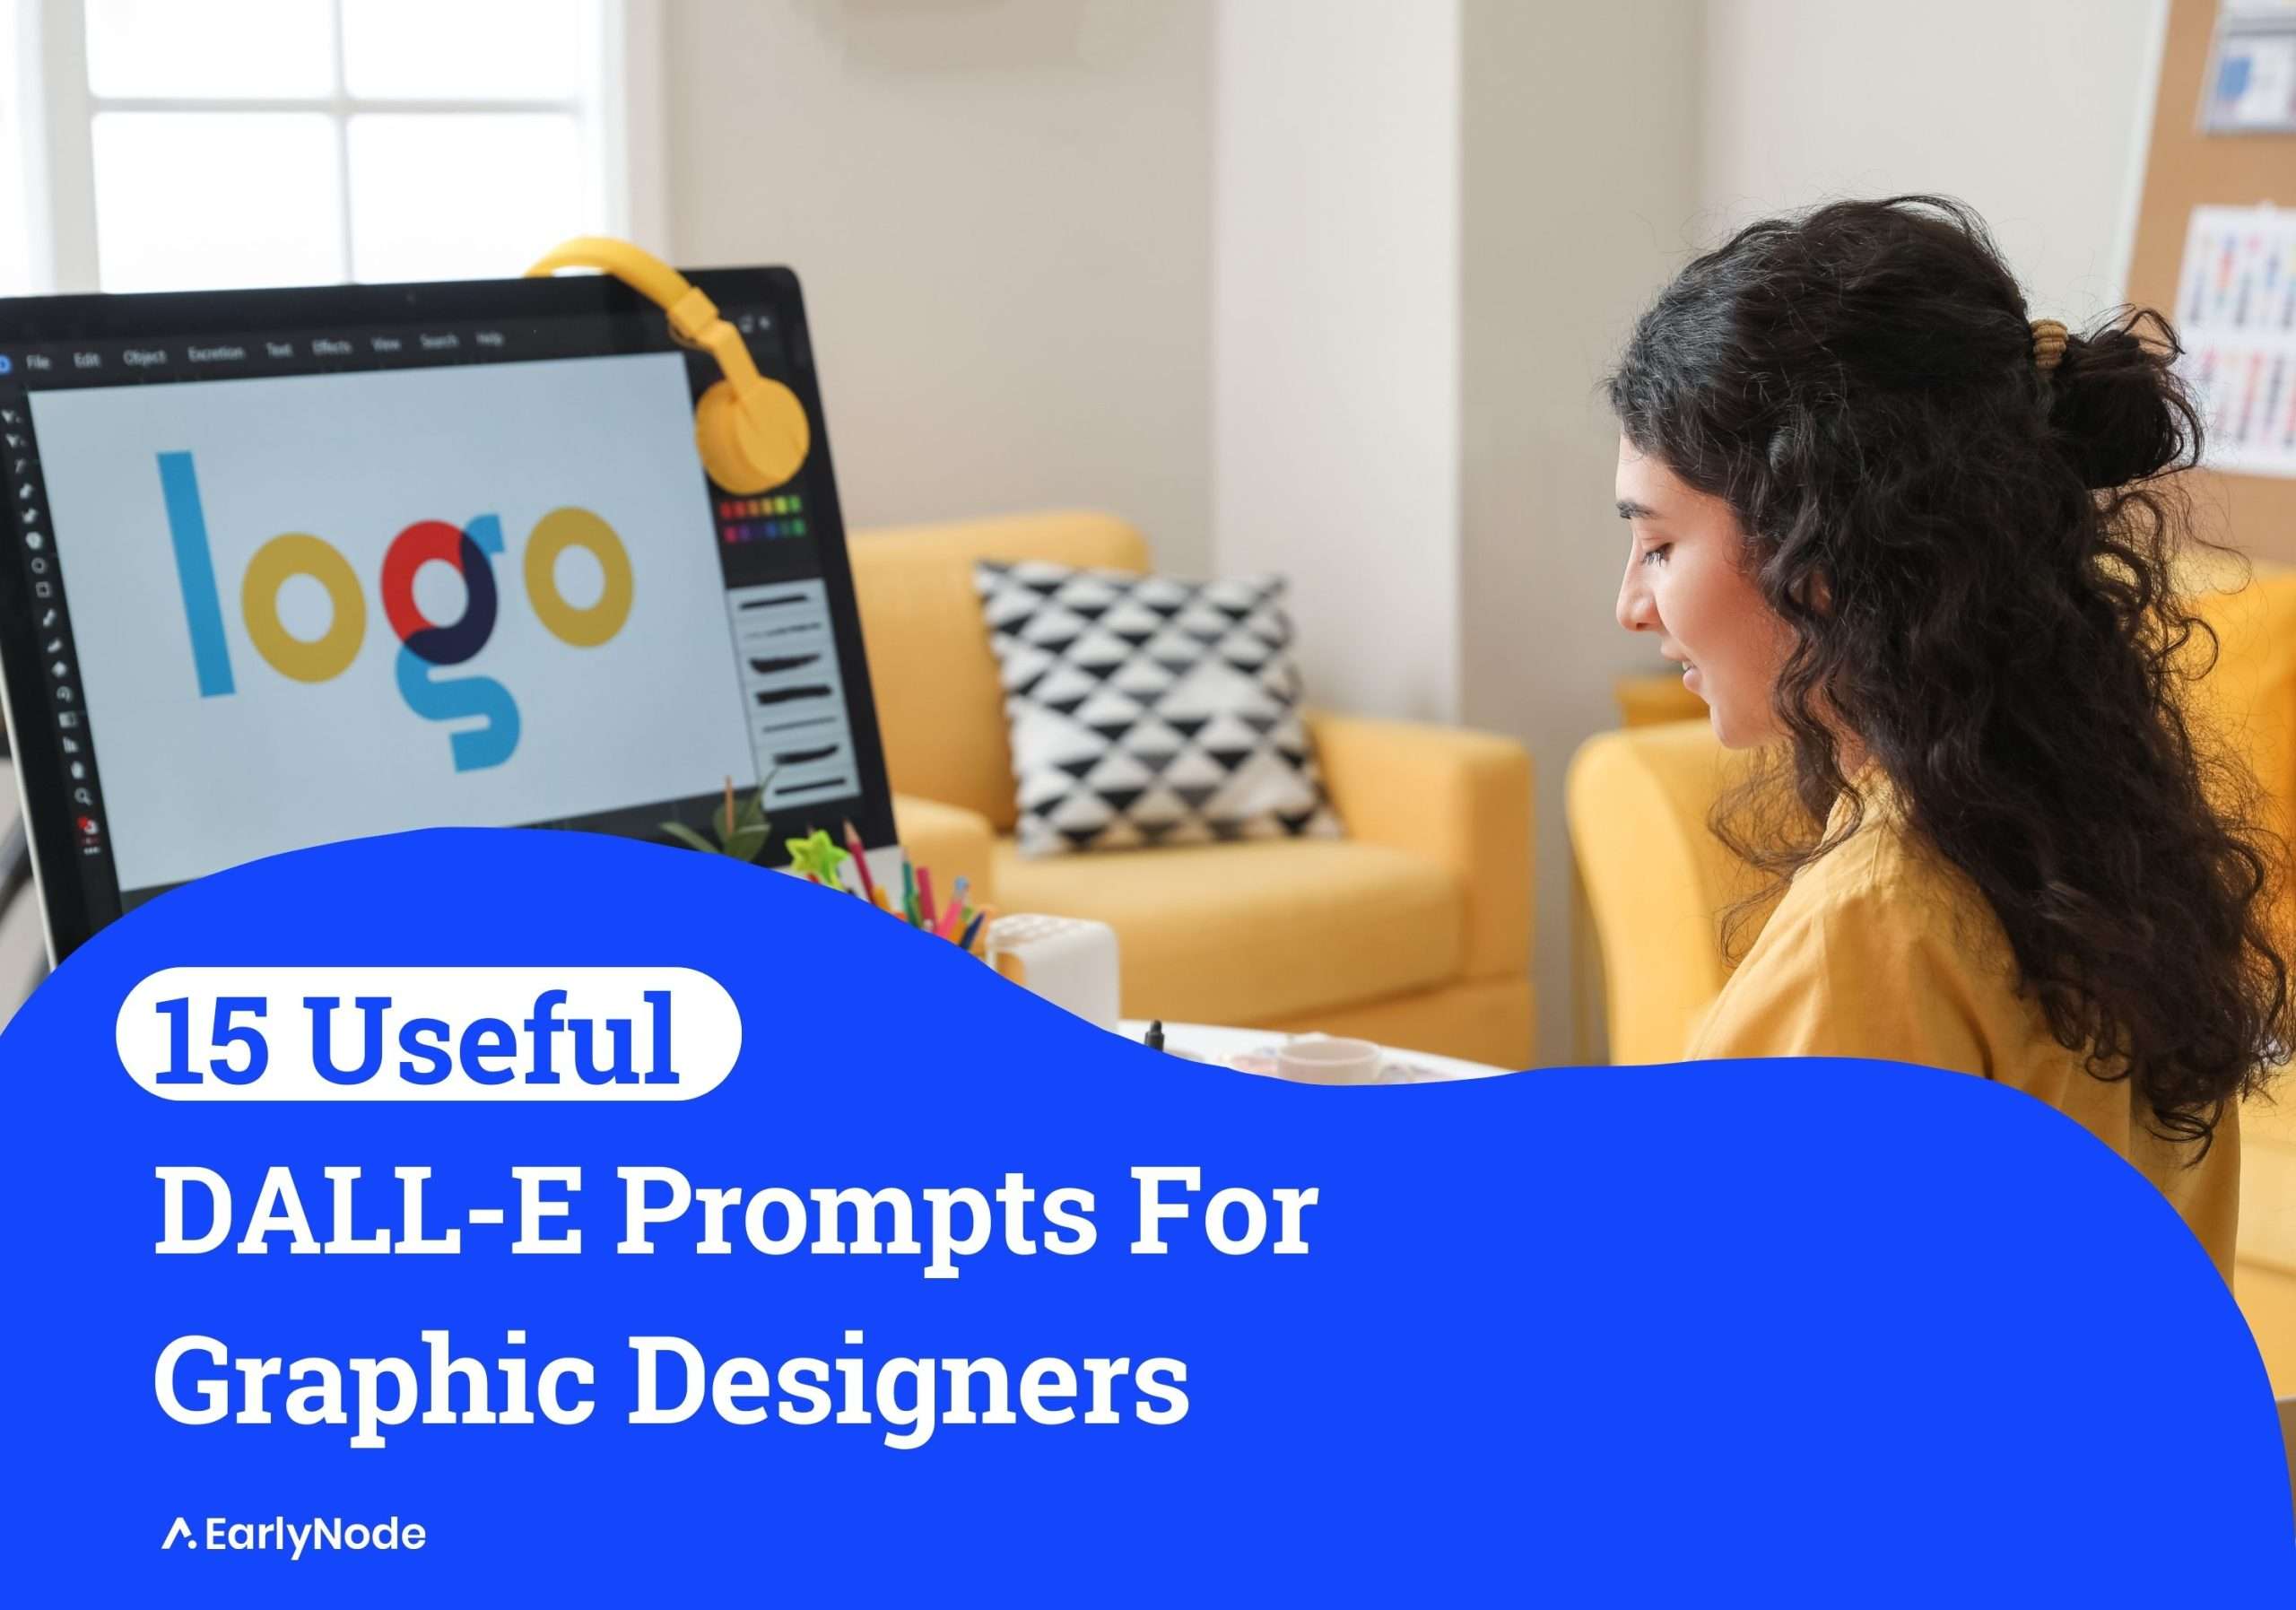 15+ Useful DALL-E Prompts for Graphic Designers